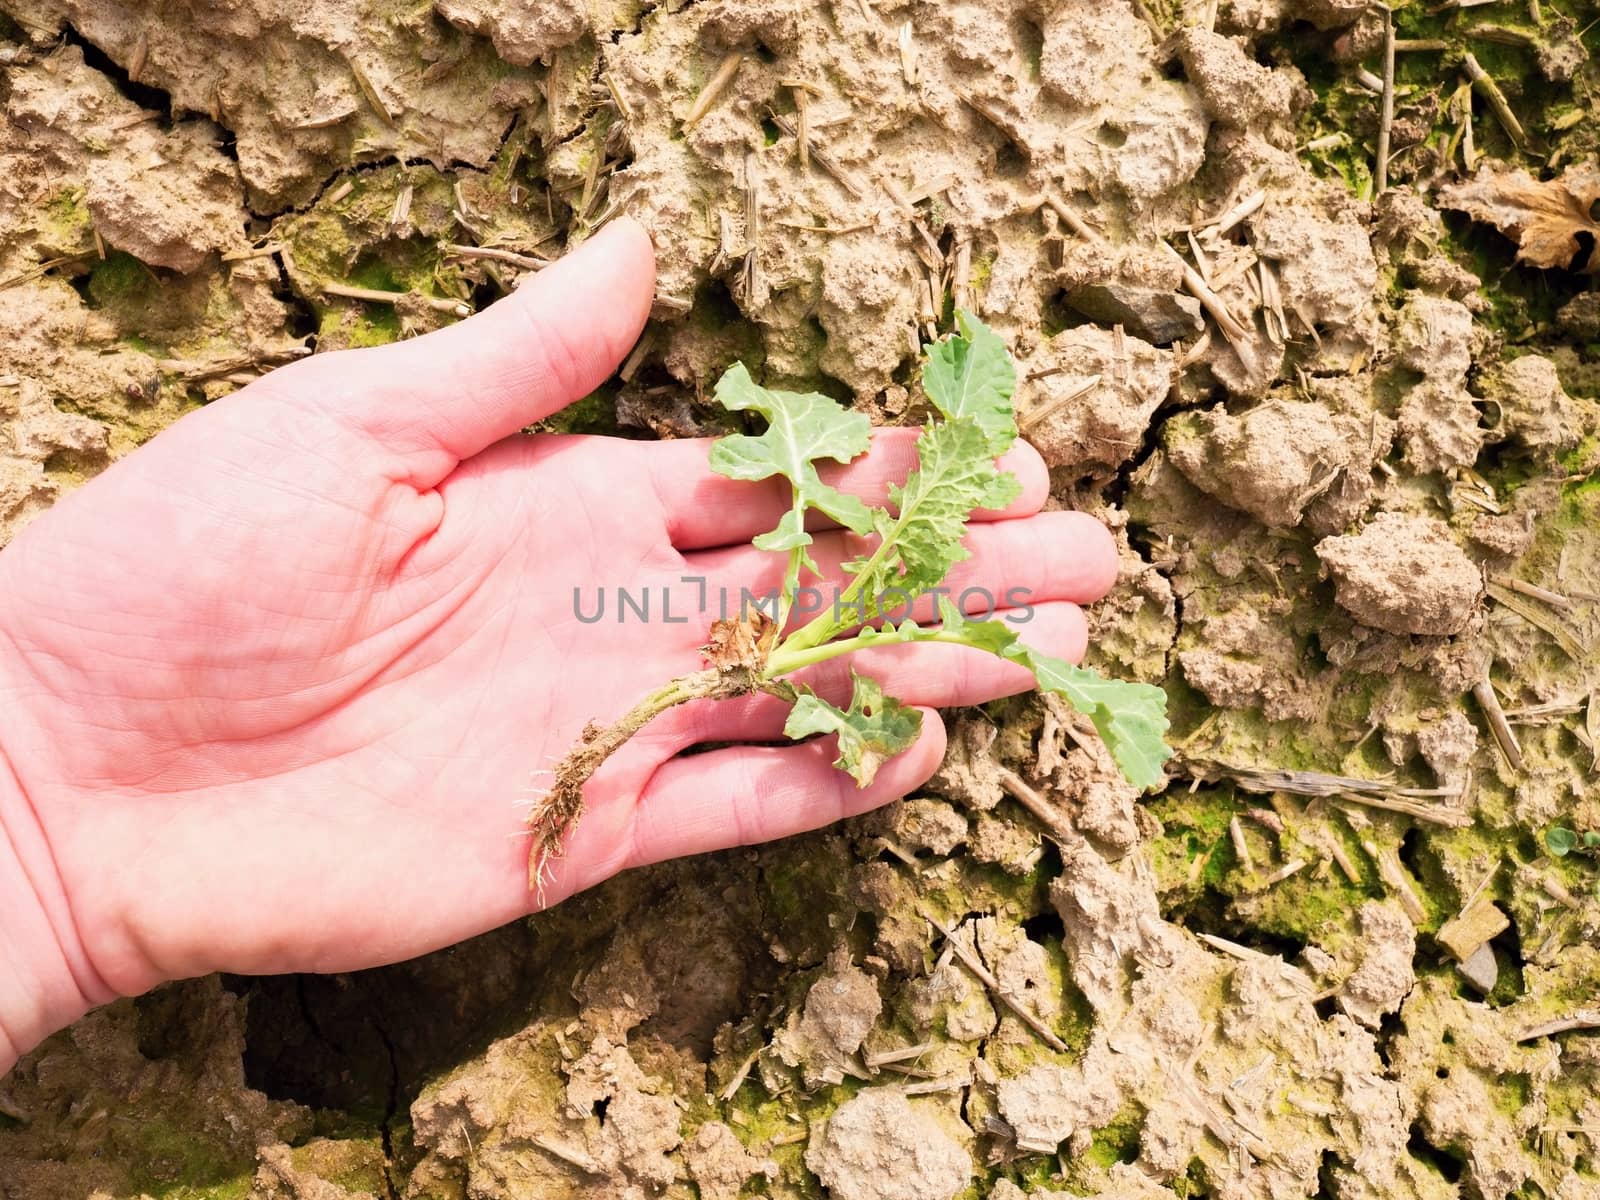 Pink skin hand yanks a small oilseed rape plant from wet humus clay. Man check quality of oilseed rape and roots. Hand touching stalk, leaves and roots.